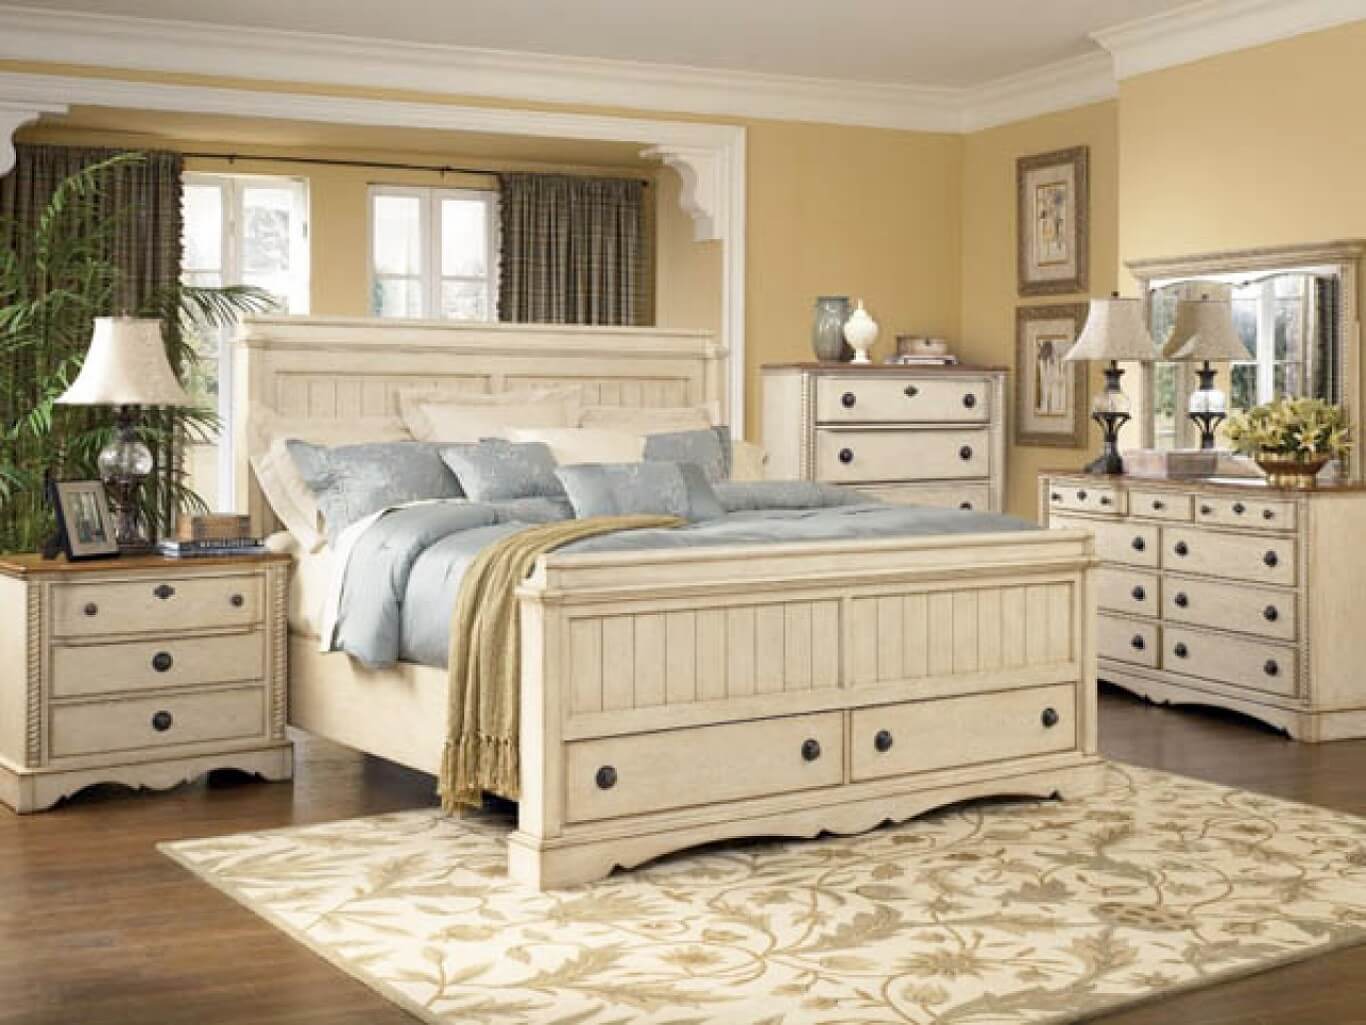 Cottage material bed